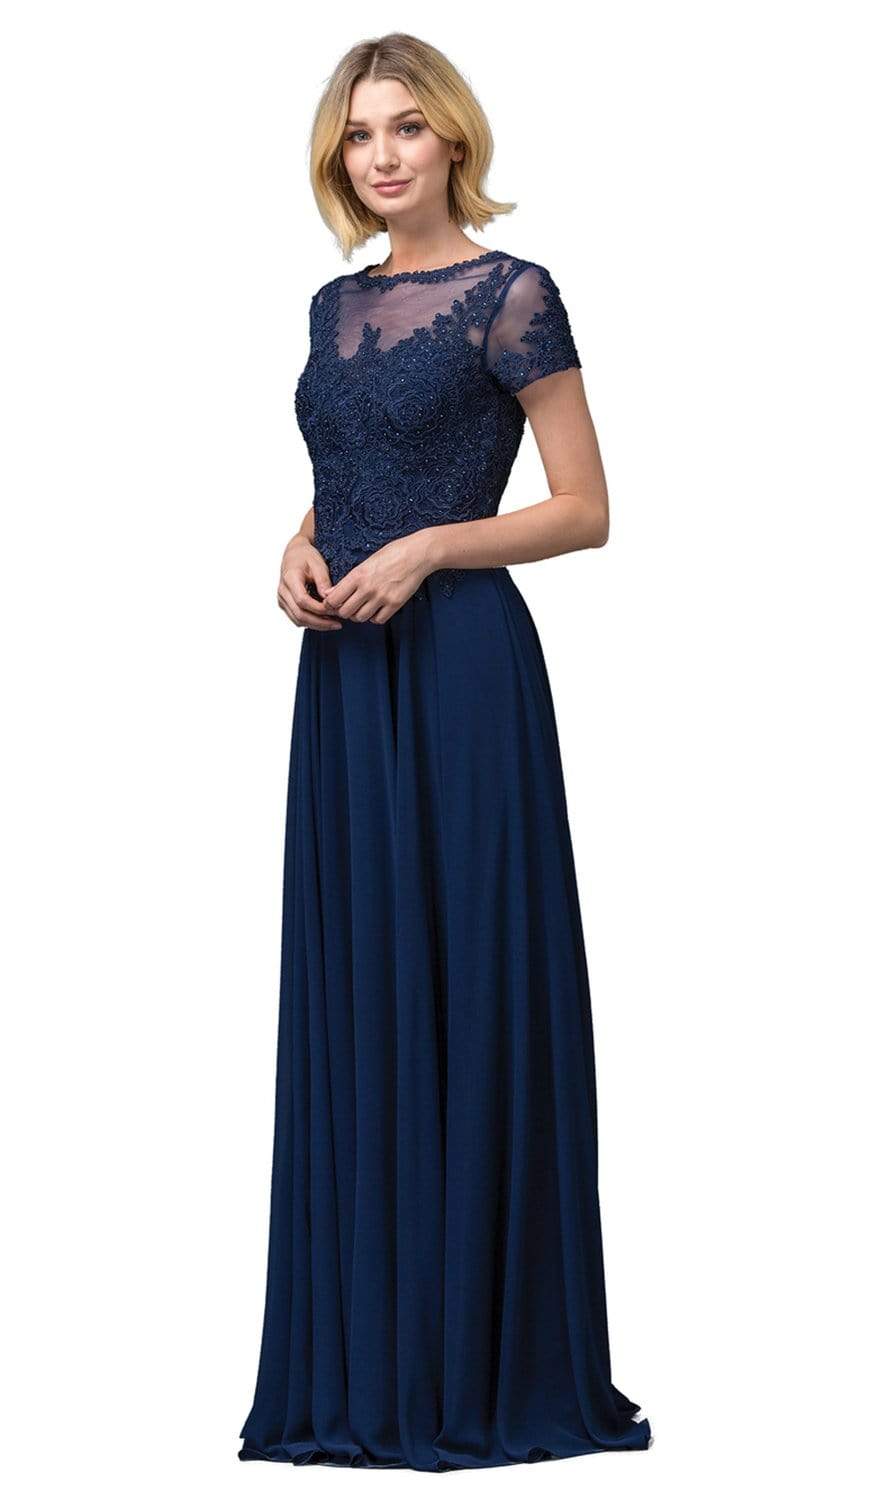 Dancing Queen - 2727 Embroidered Rosette Short Sleeve Long Dress Mother of the Bride Dresses XS / Navy